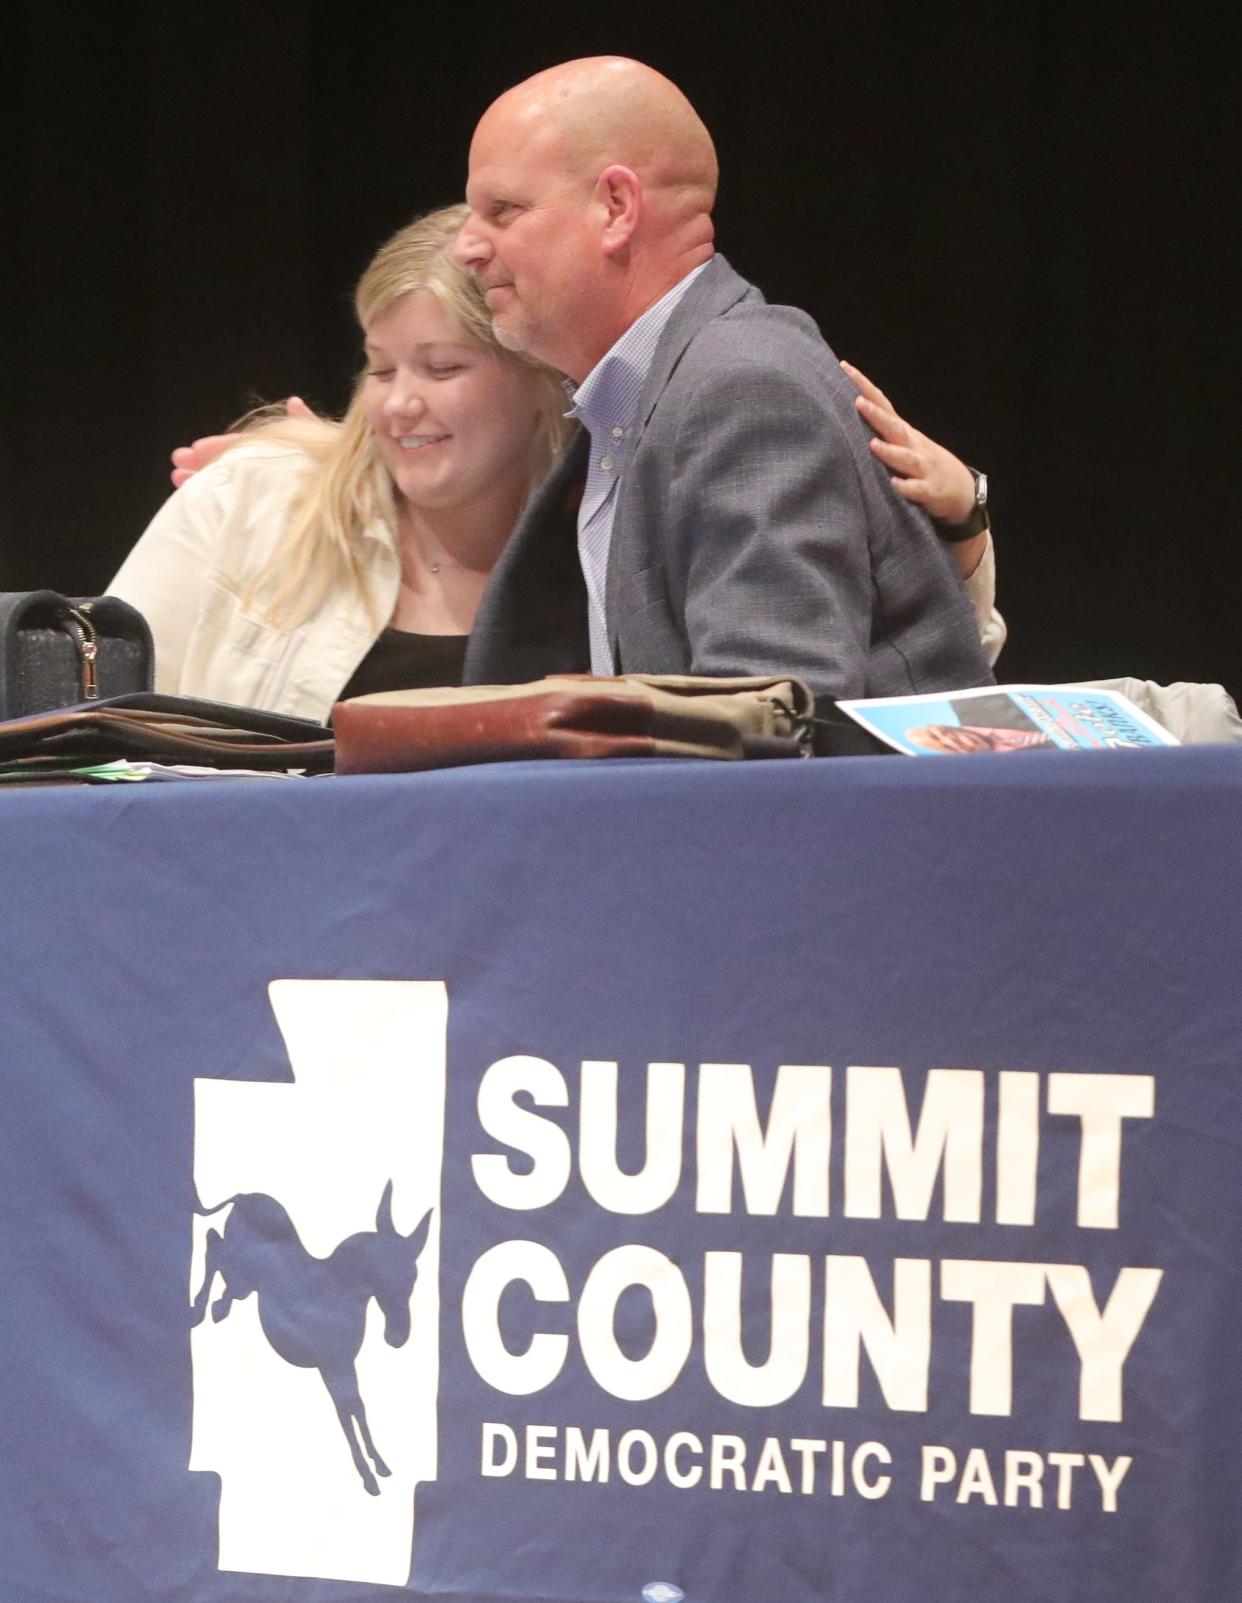 Newly elected Summit County Democratic Party Chair Mark Derrig is congratulated by Treasurer Morgan Ferrell during an organizational meeting Wednesday at North High School in Akron.